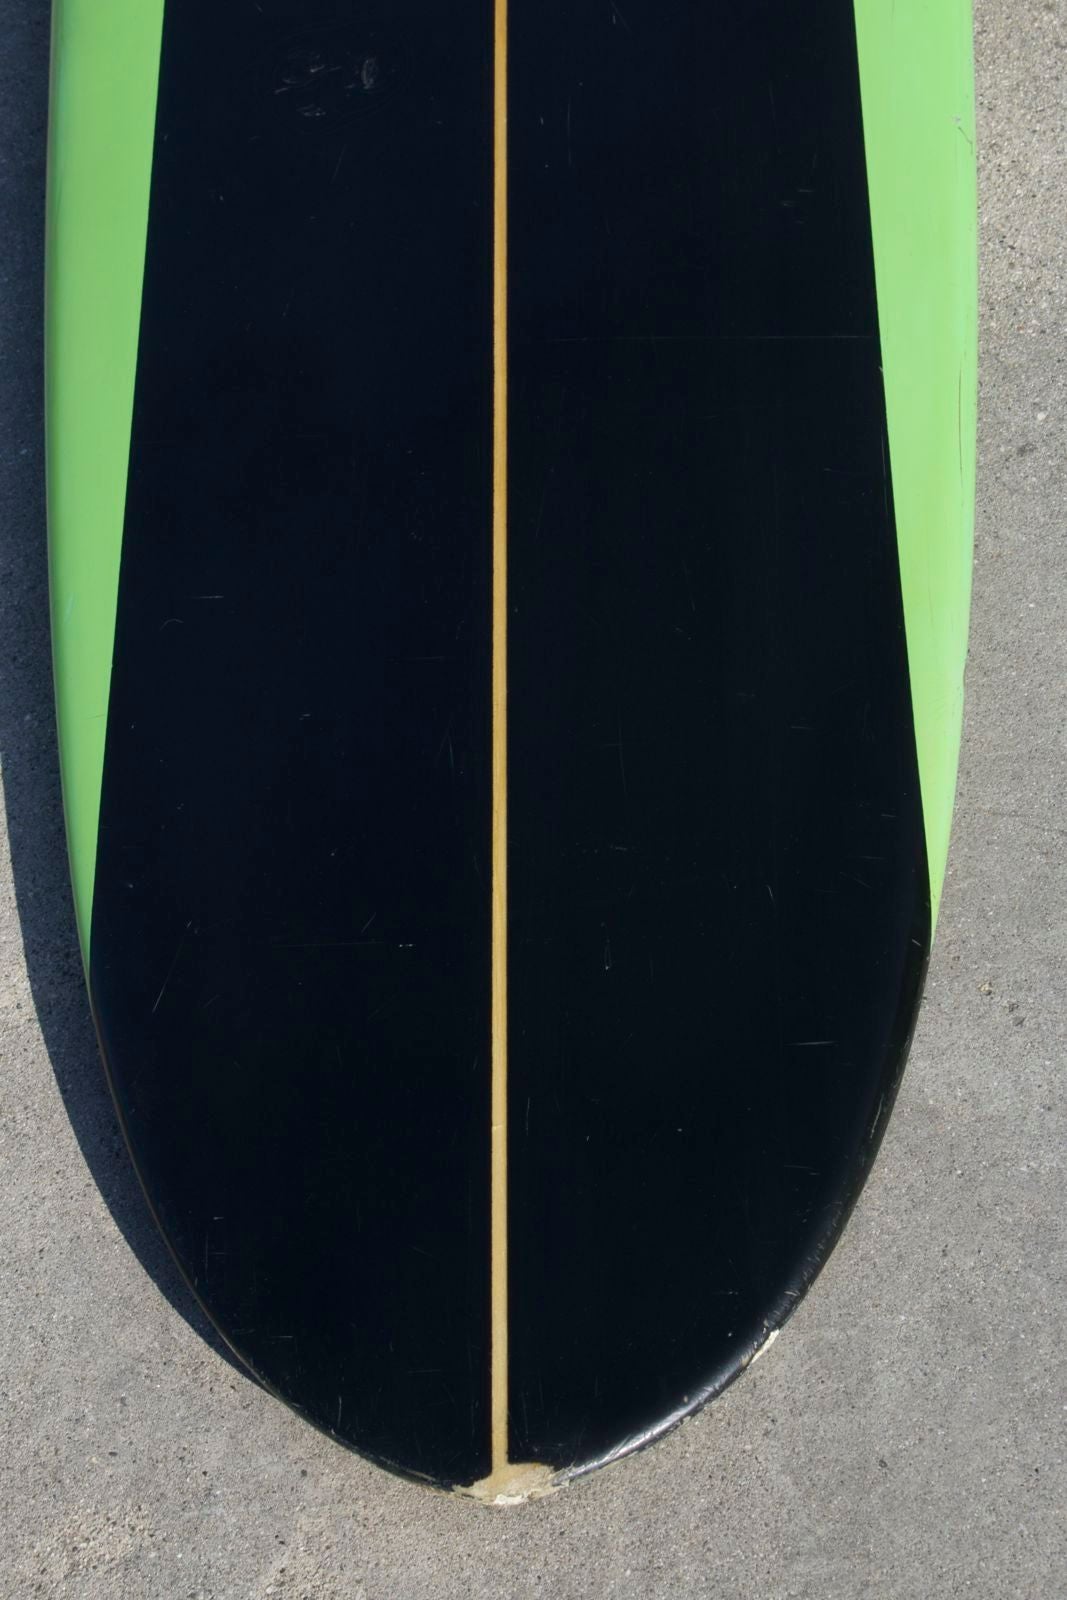 This majestic early 1960s Jack Haley Surfboard gives us visions of slow turns and long glides on a Classic California wave. The color scheme of black and green with a clear area on the deck around the logo make it a real eye catcher. 

From the